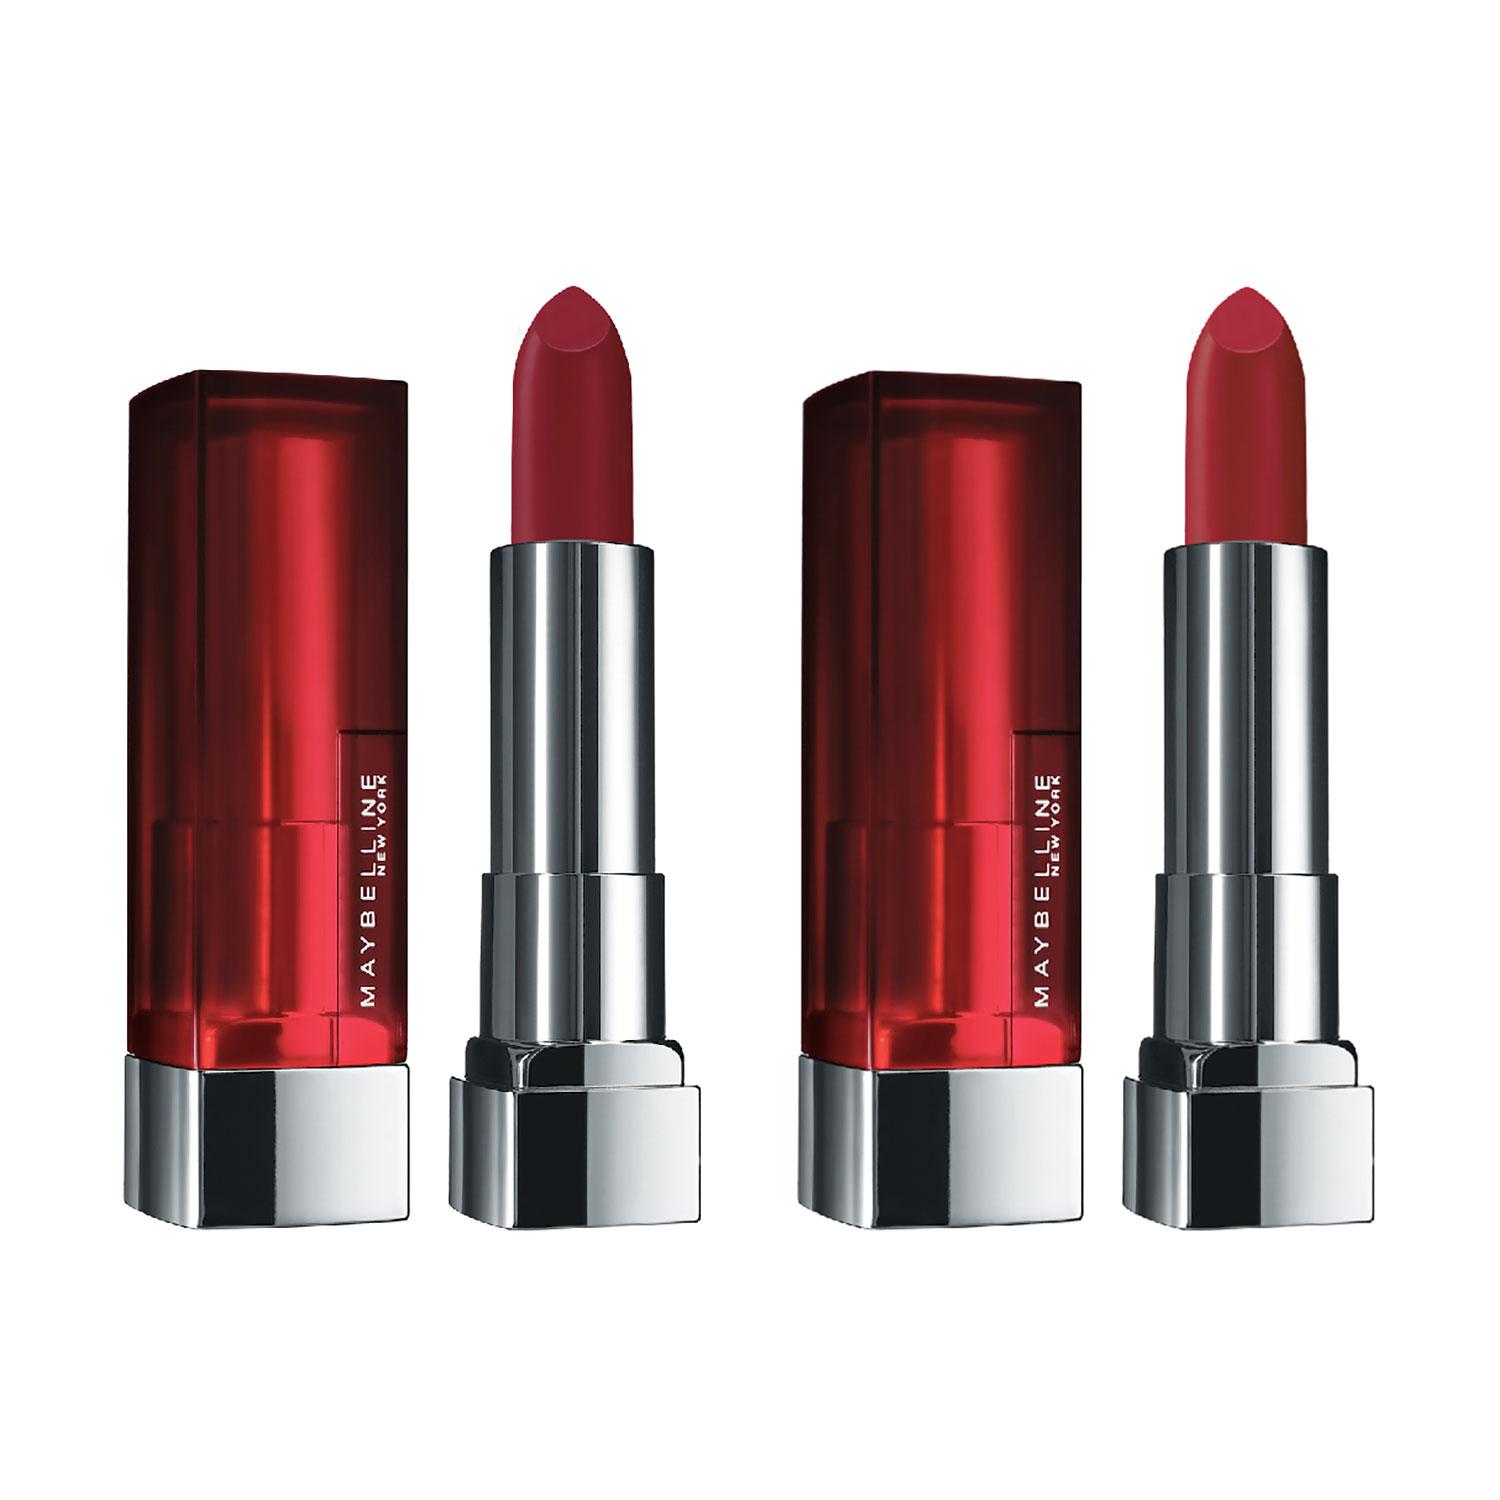 Maybelline New York | Maybelline New York Color Sensational Creamy Matte Lipstick Pack of 2 (Shades 691 & 695)